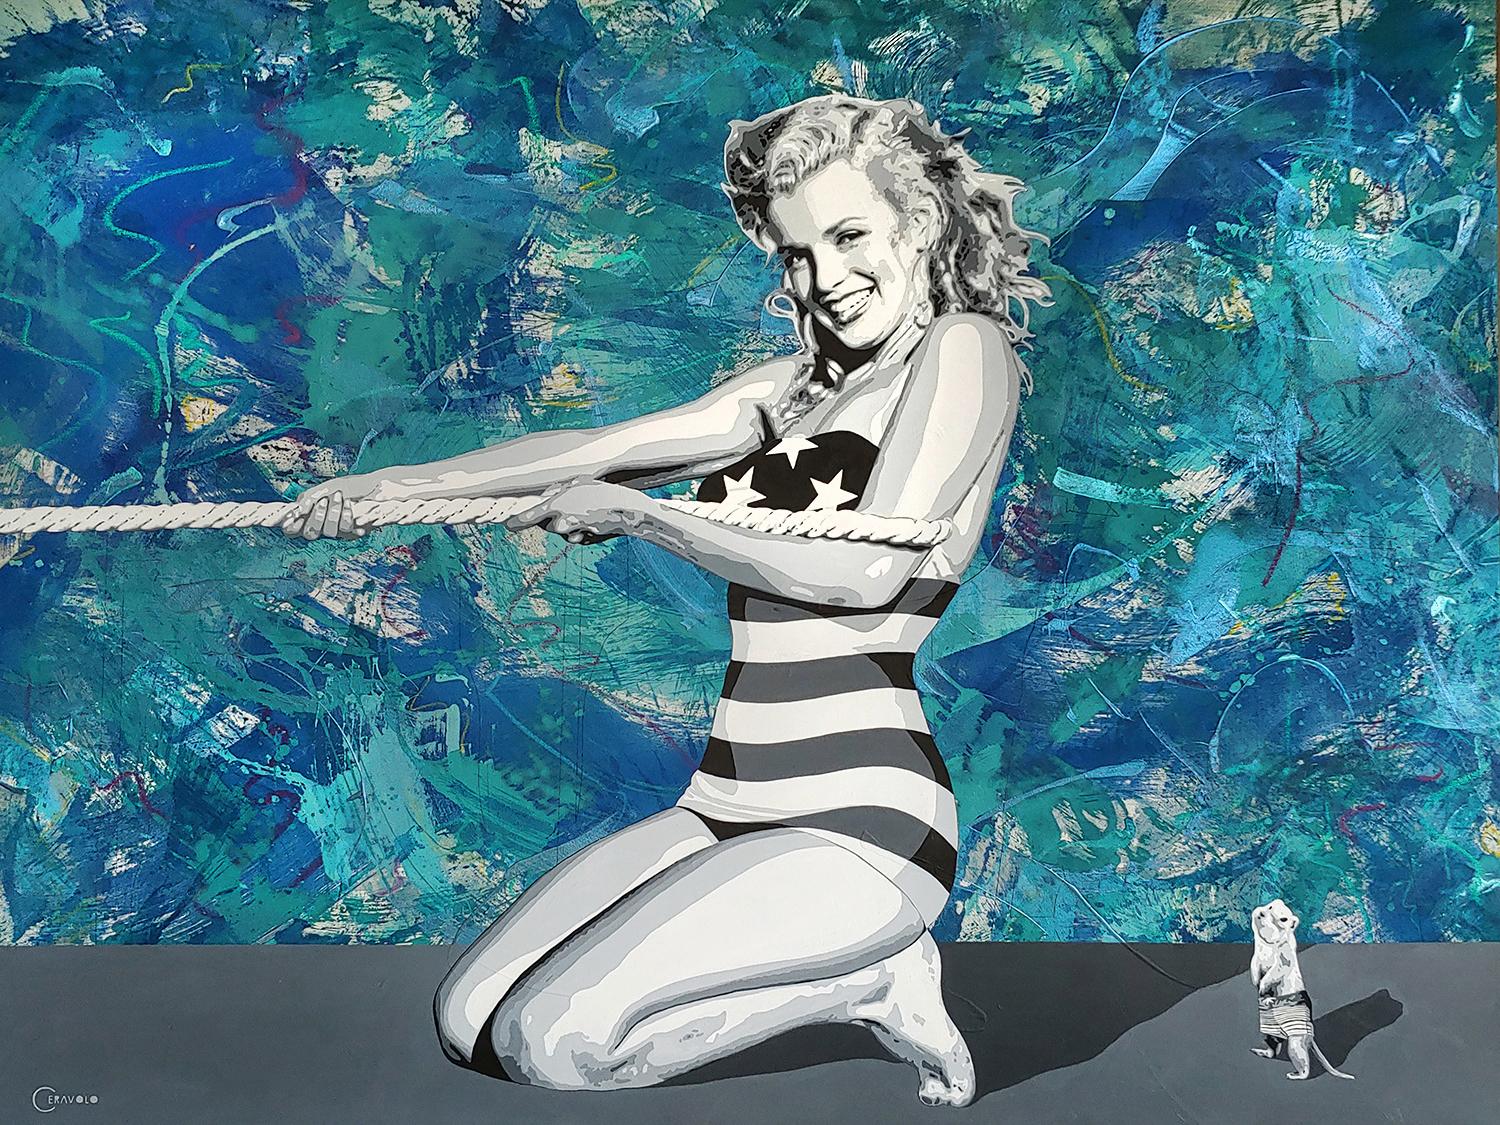 Young Marilyn at the Beach tug of war, Large 68x88 Oil and Acrylic on canvas